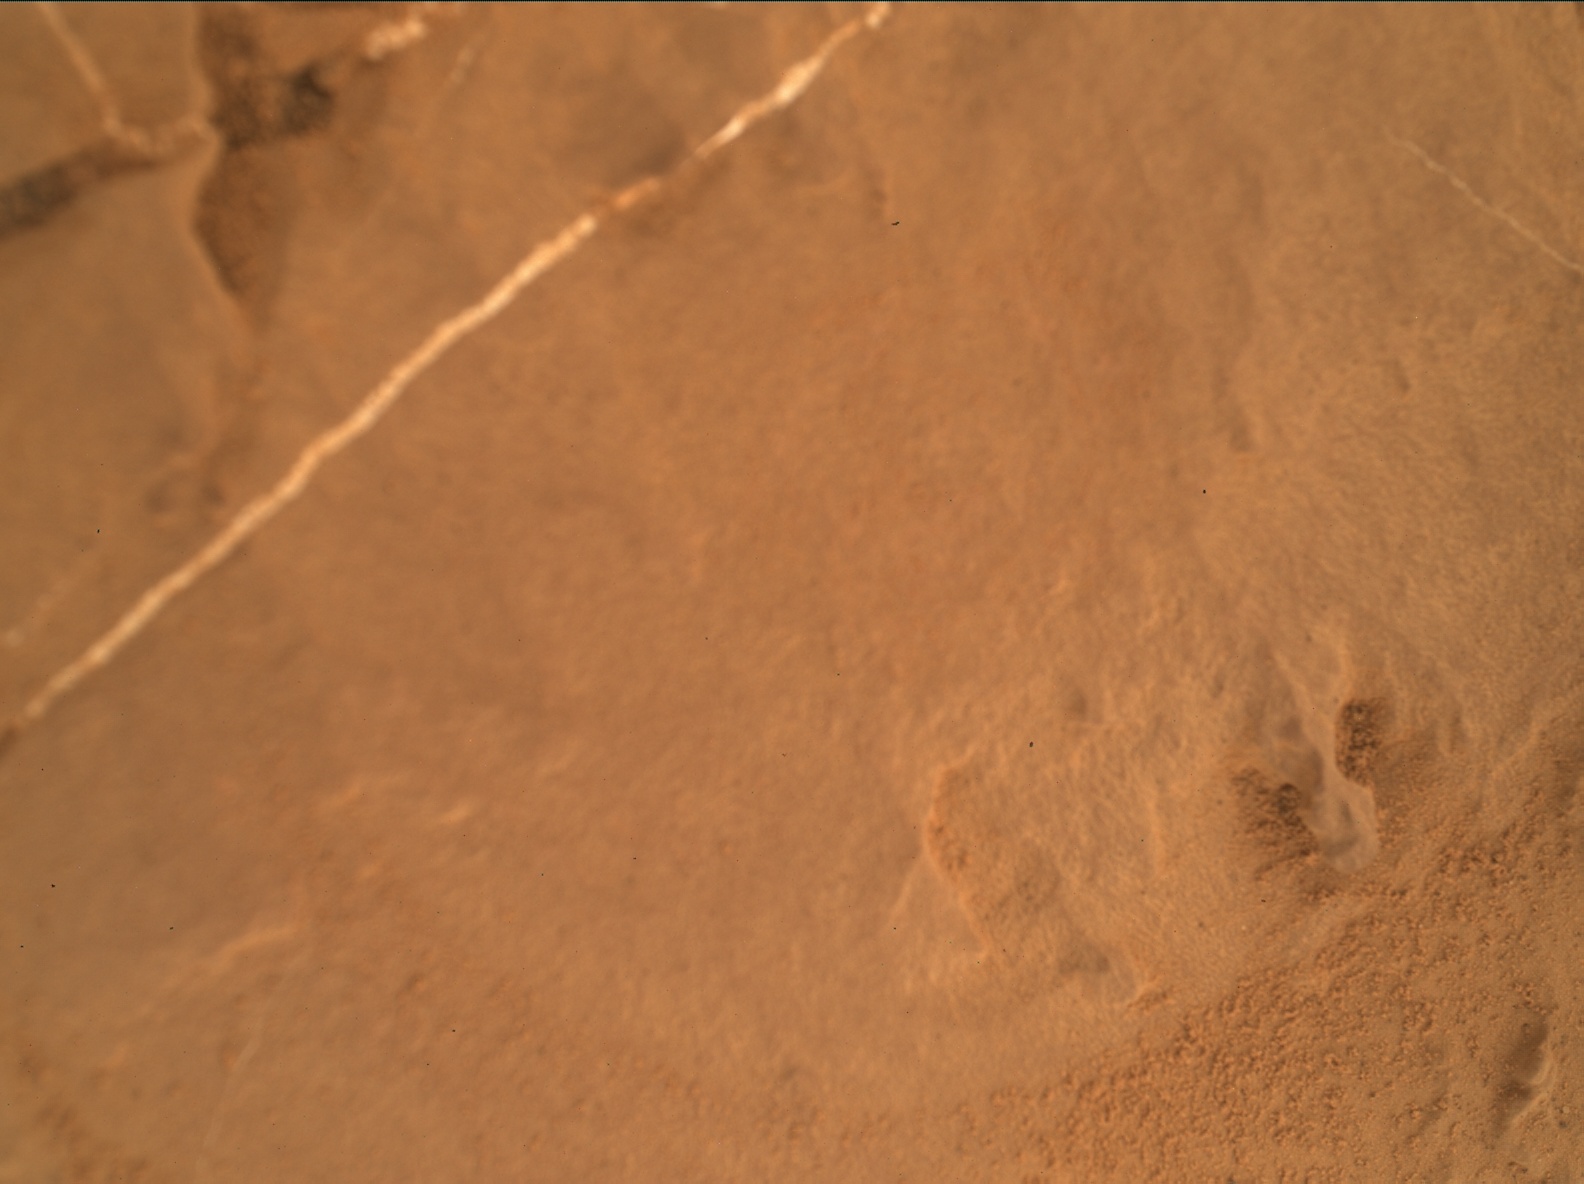 Nasa's Mars rover Curiosity acquired this image using its Mars Hand Lens Imager (MAHLI) on Sol 2132